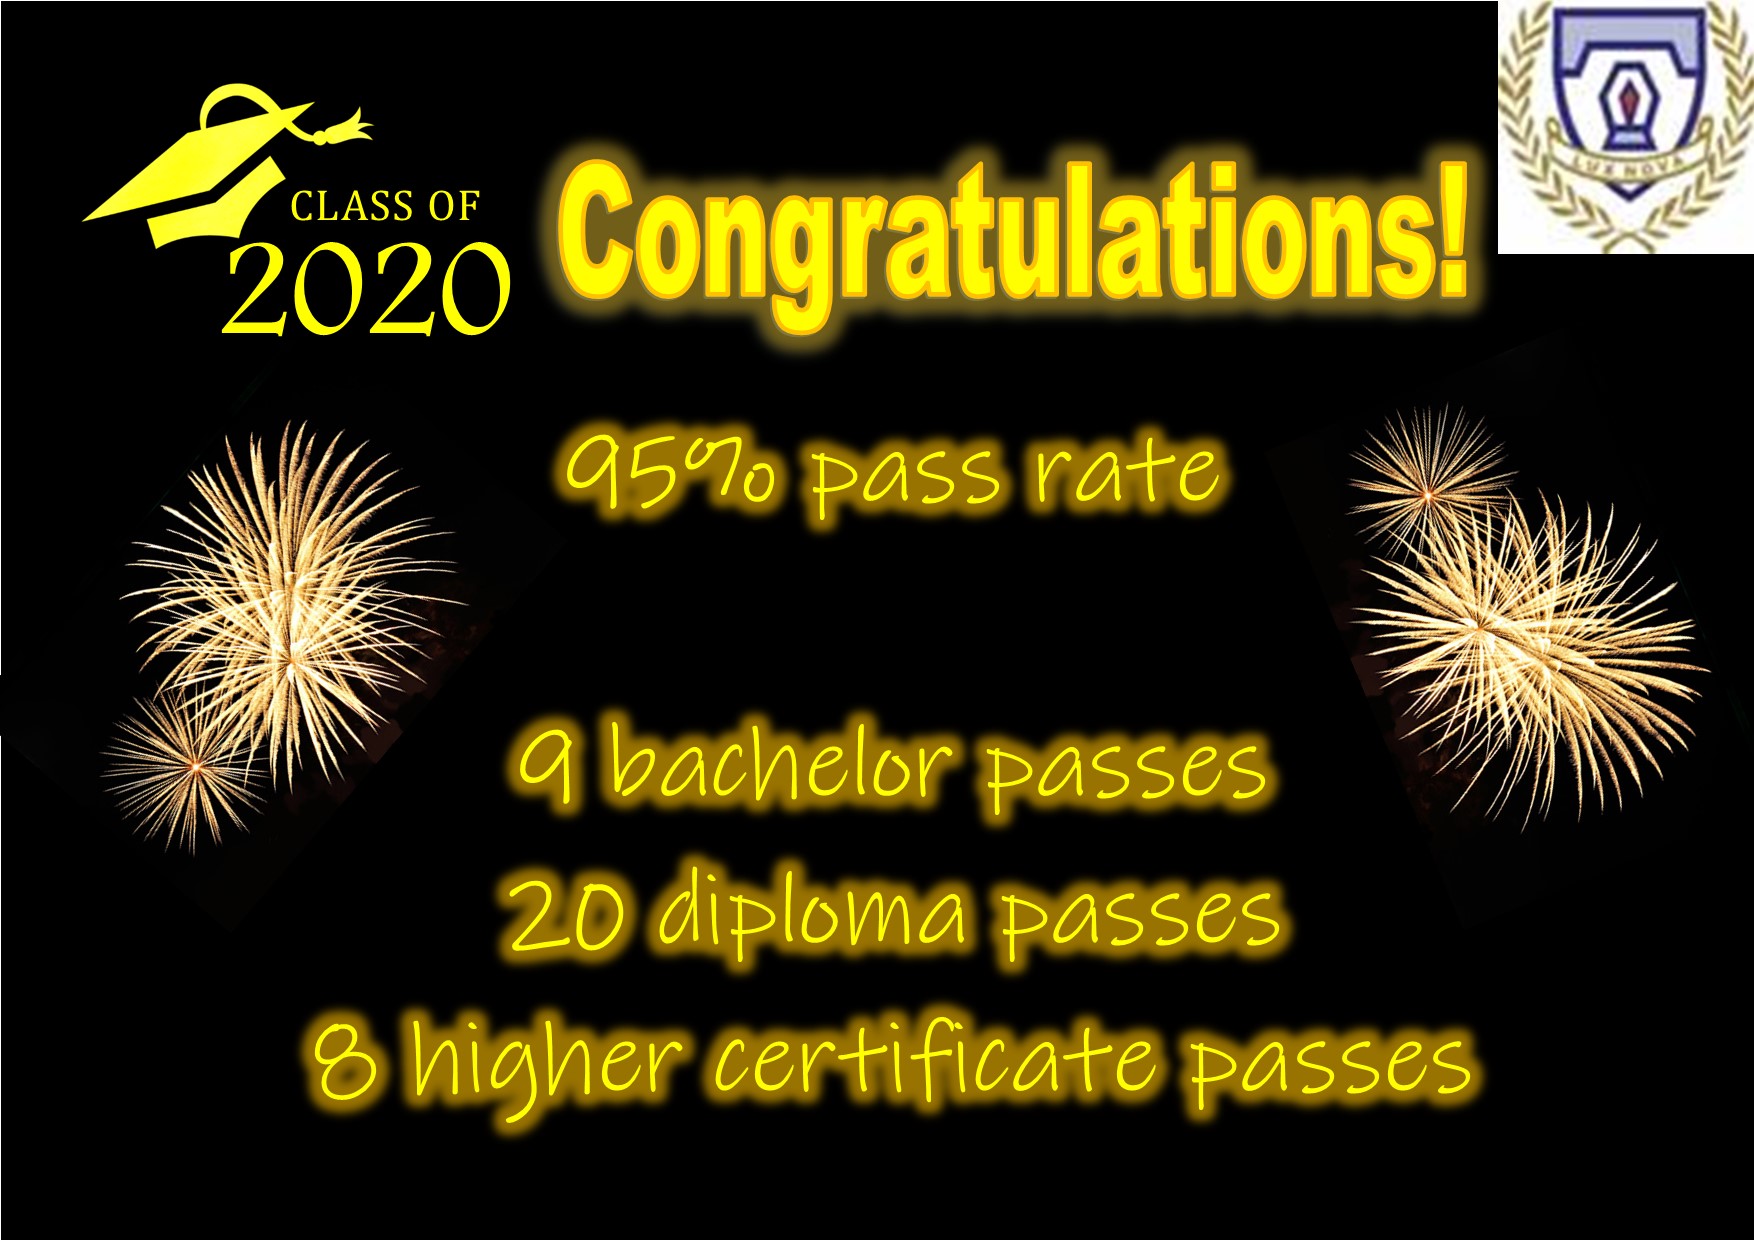 Congratulations! 95% pass rate, 9 bachelor passes, 20 diploma passes, 8 higher certificate passes